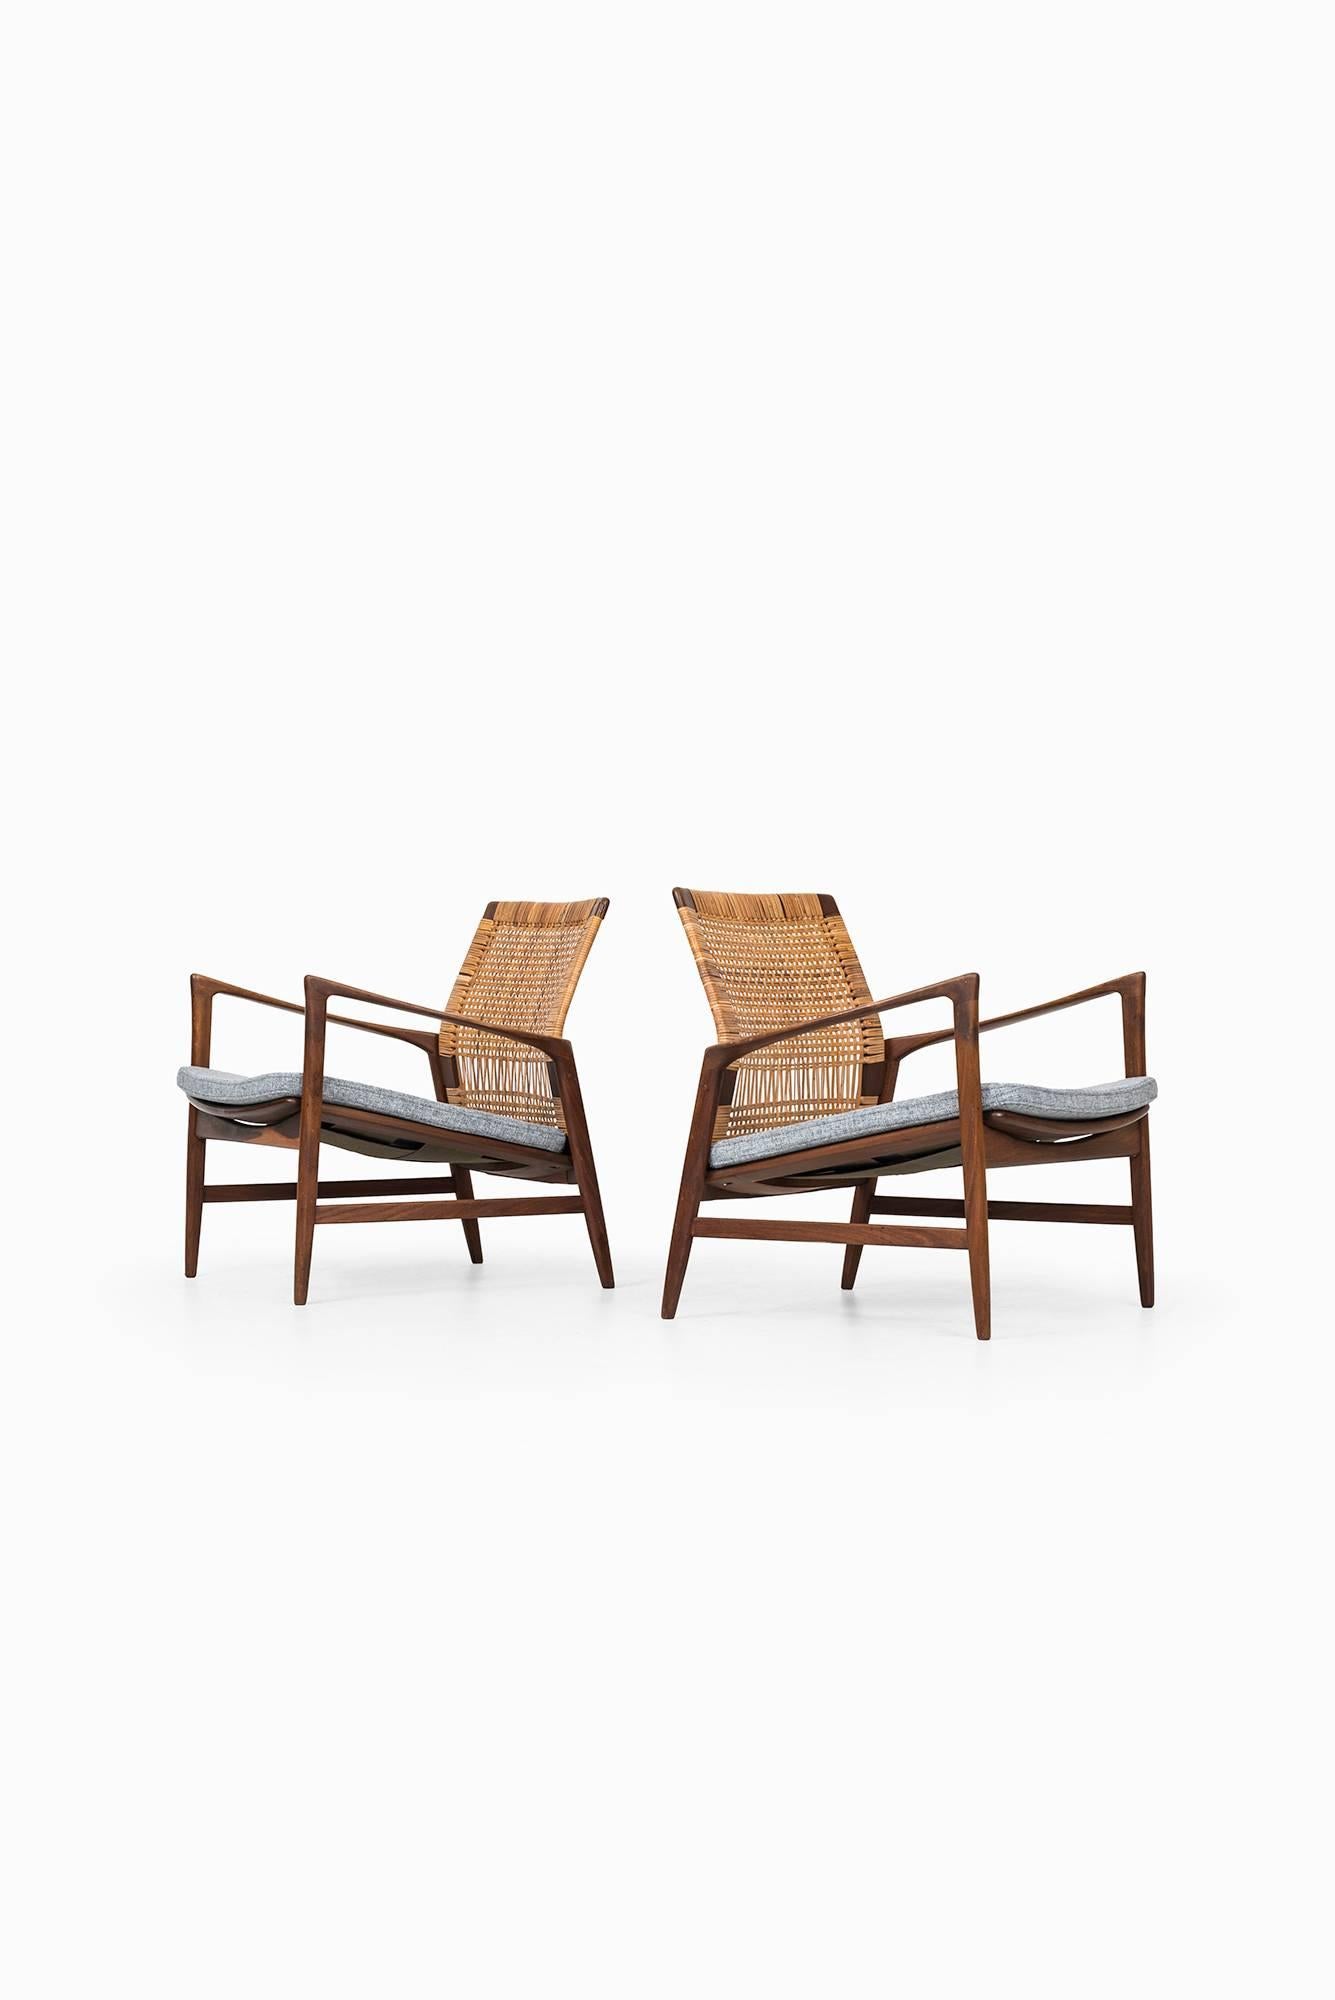 Rare pair of easy chairs model Åre designed by Ib Kofod-Larsen. Produced by OPE in Sweden.